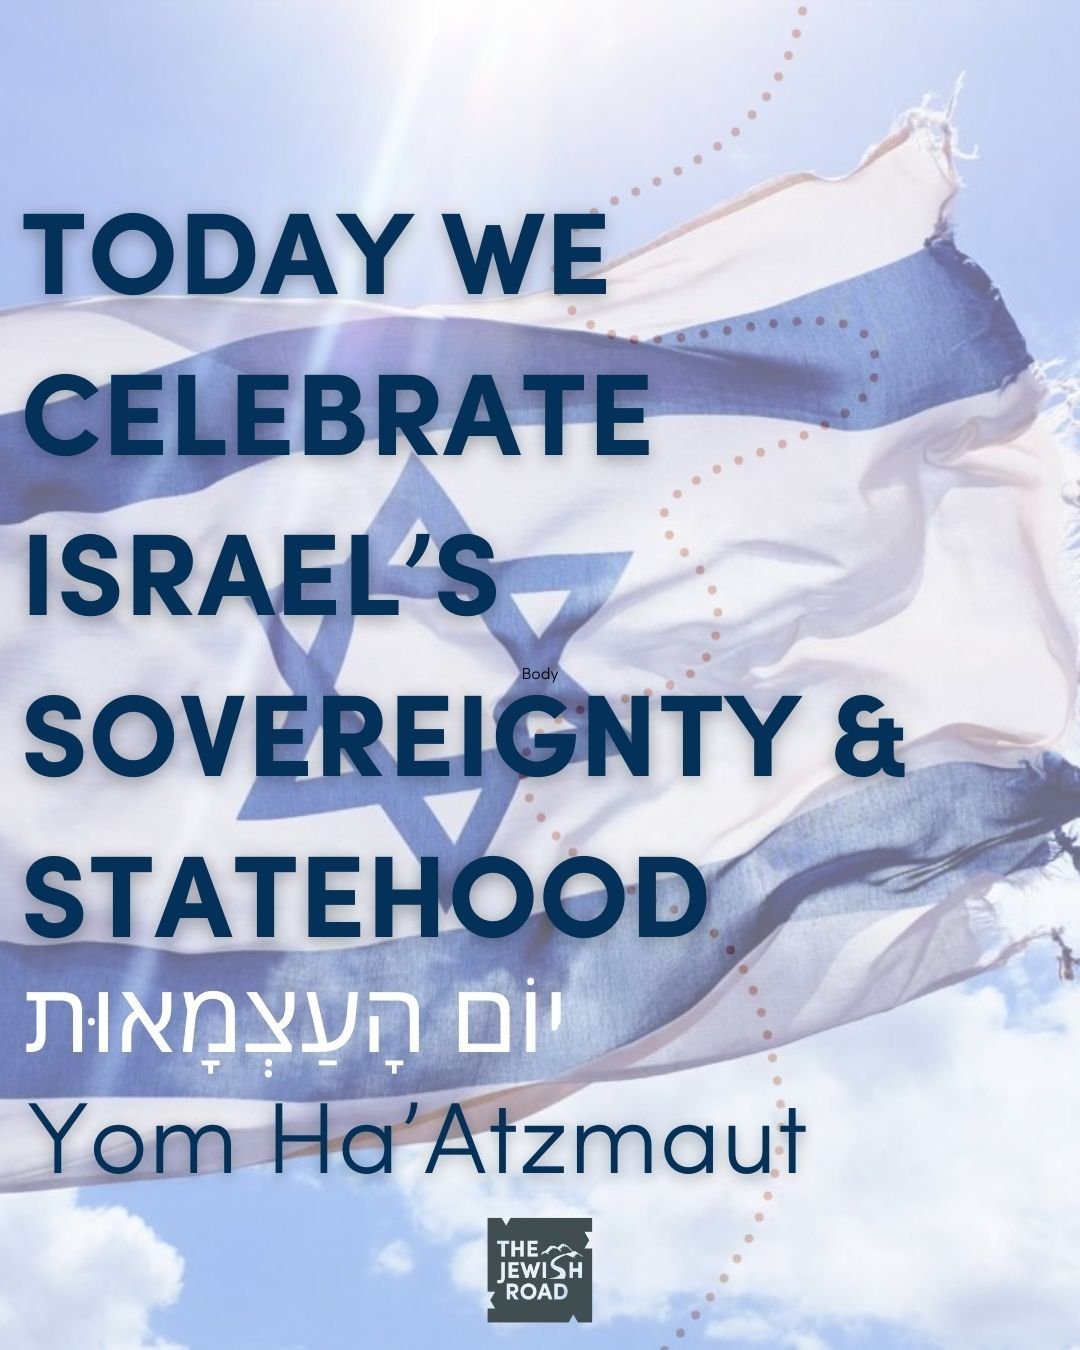 Today, it seems more important than ever to acknowledge and celebrate Yom Ha'Atzmaut - Israeli Independence Day! 

On this day in 1948, David Ben-Gurion proclaimed Israel a nation -  a monumental event in Jewish history!  His words, rich with the ide